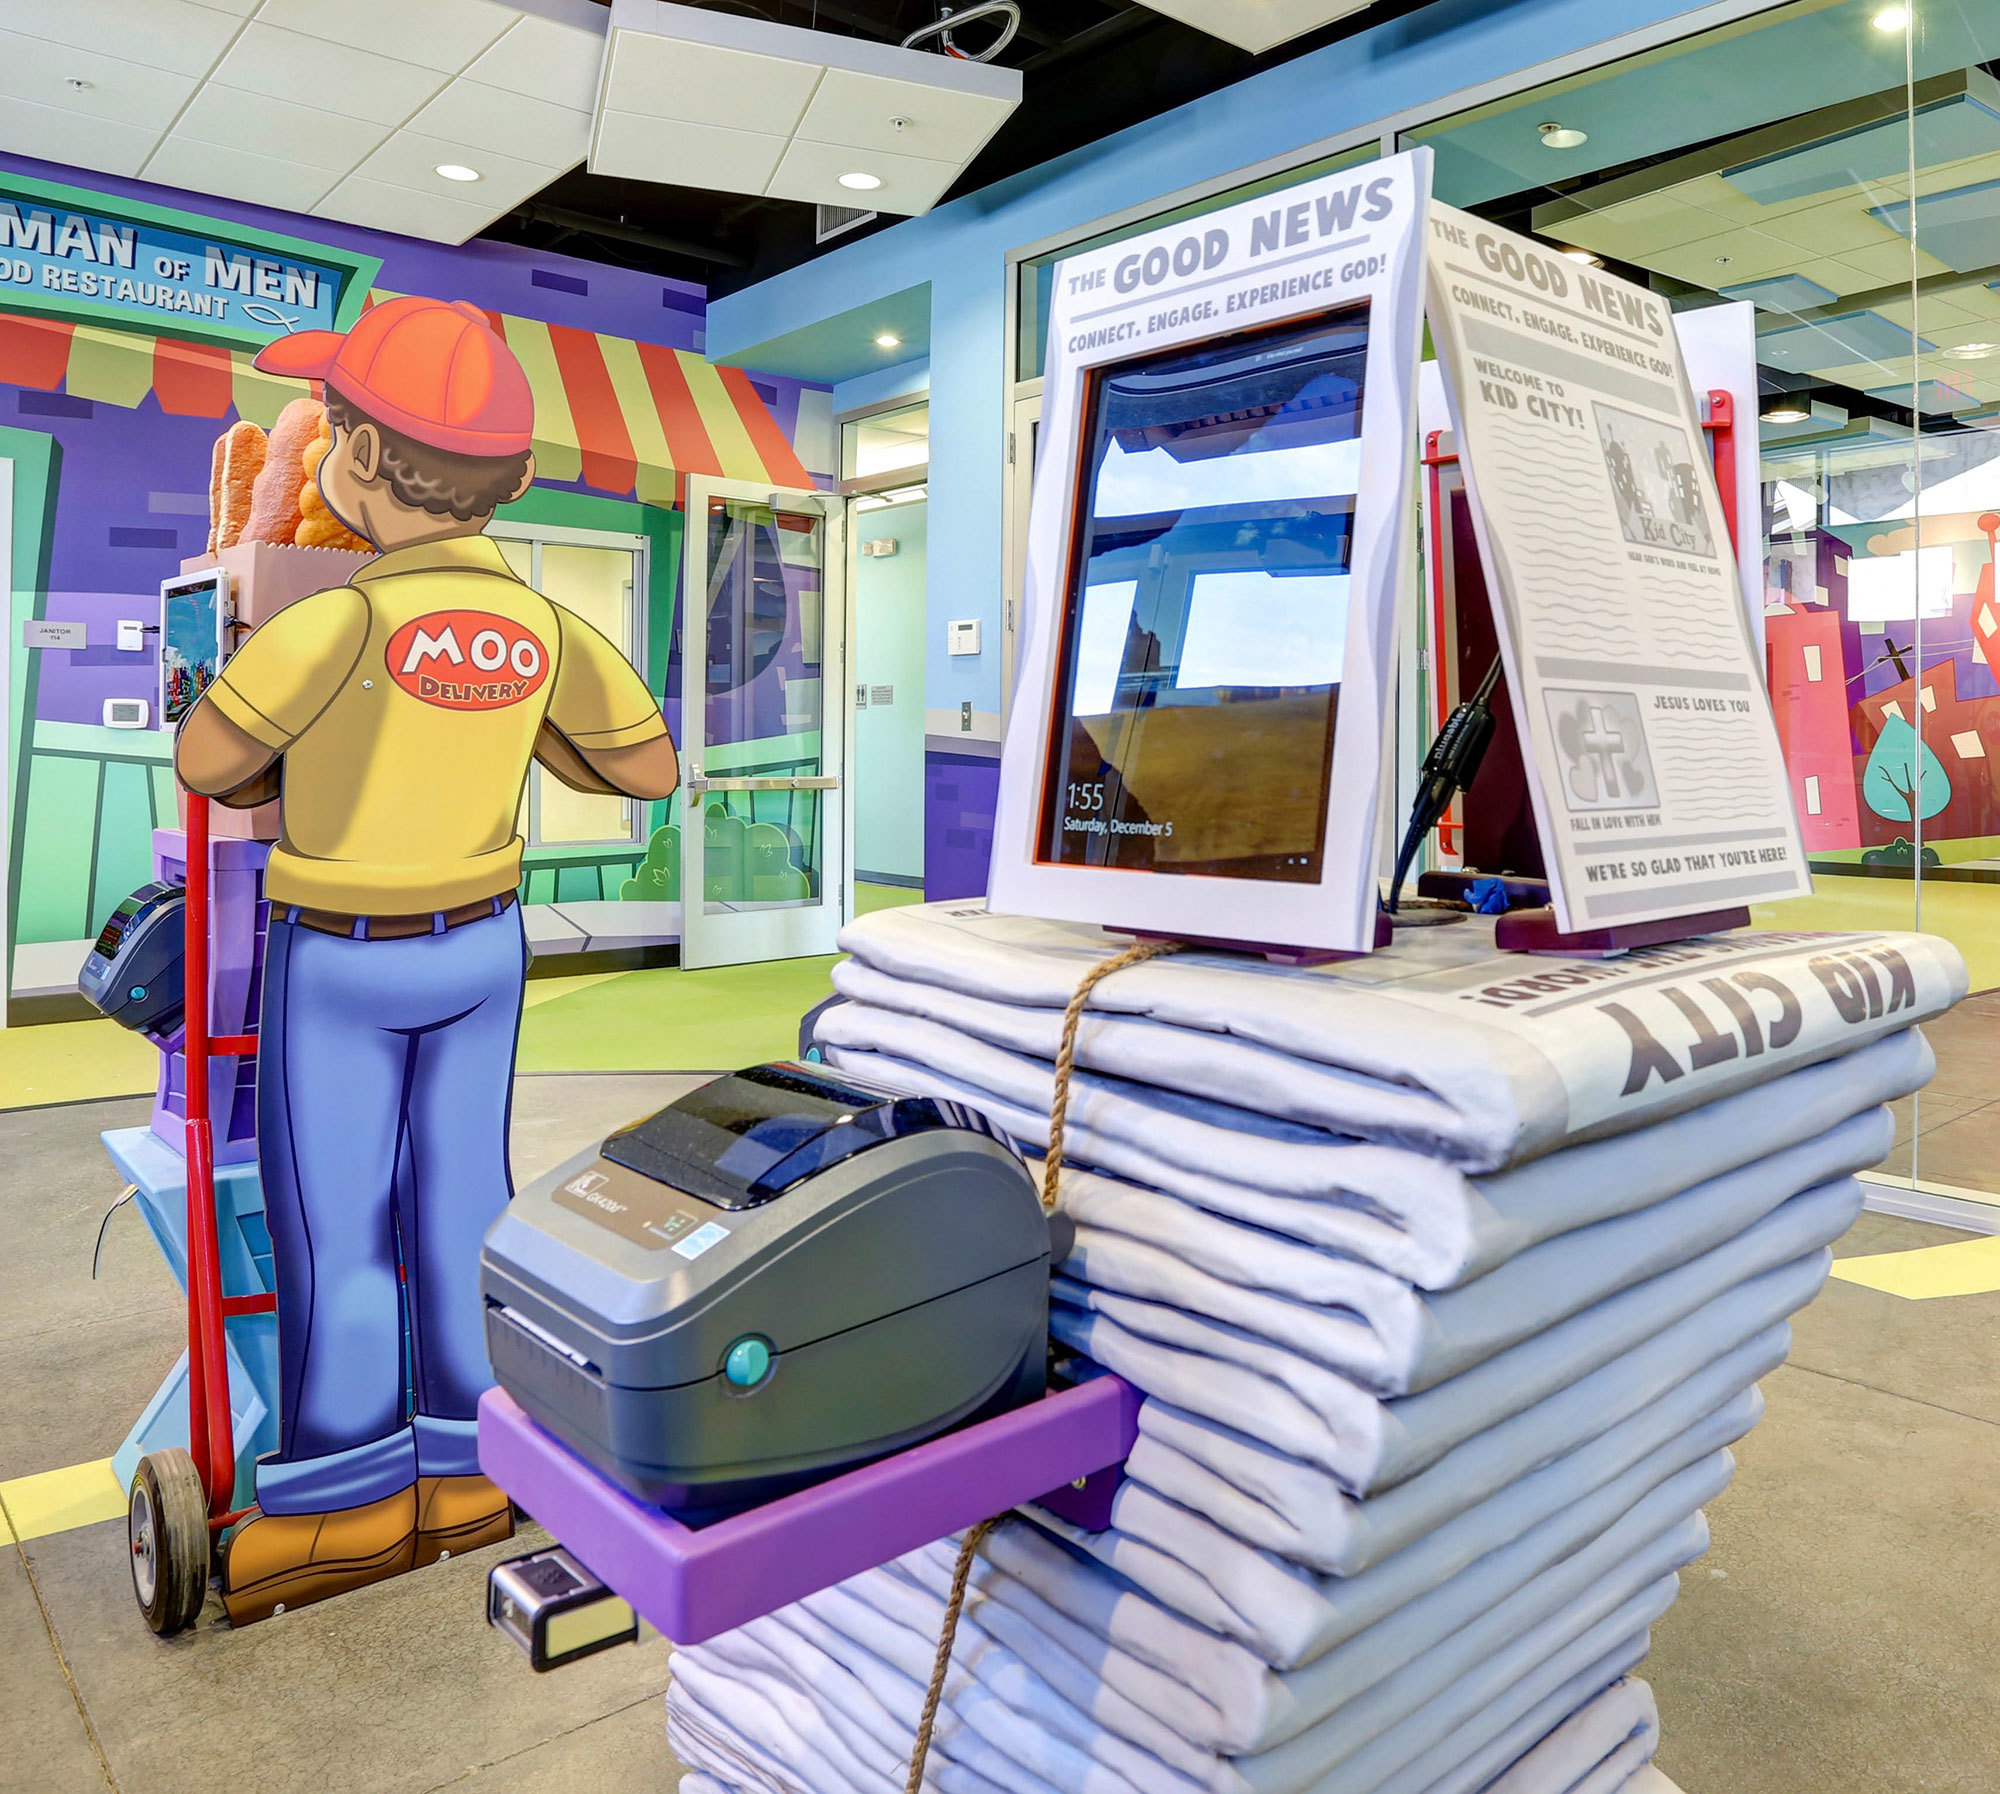 3D Sculpted Newspaper Stand Check In Kiosk in Big City Toon Town Themed Space at Mount of Olives